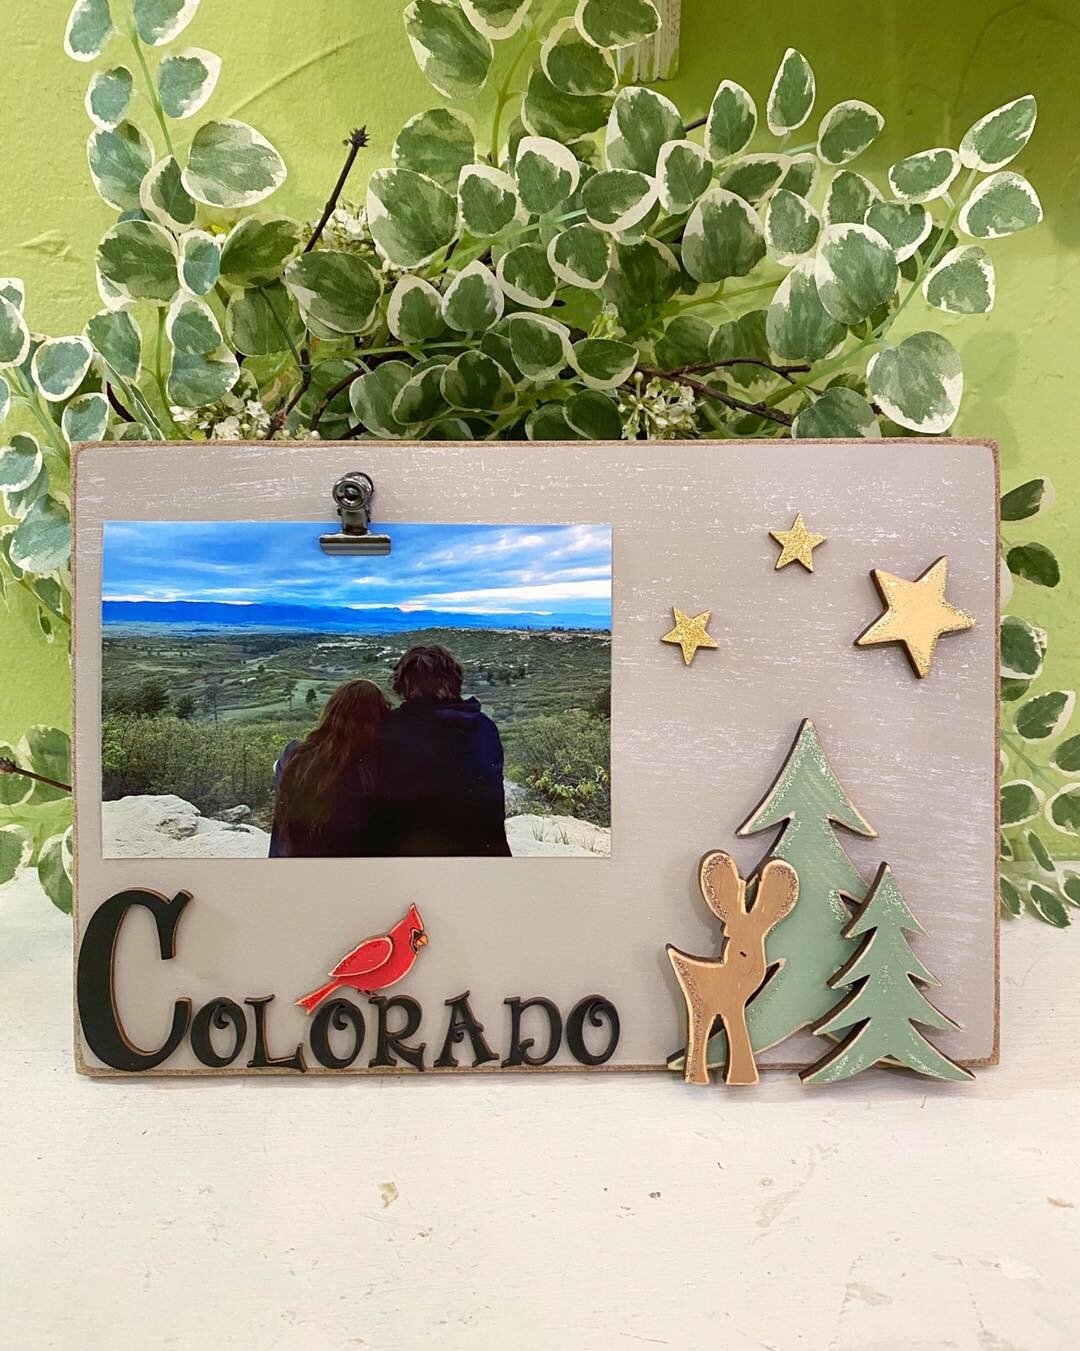 #samplesaturday Our clip frames are perfect for commemorating trips 💕